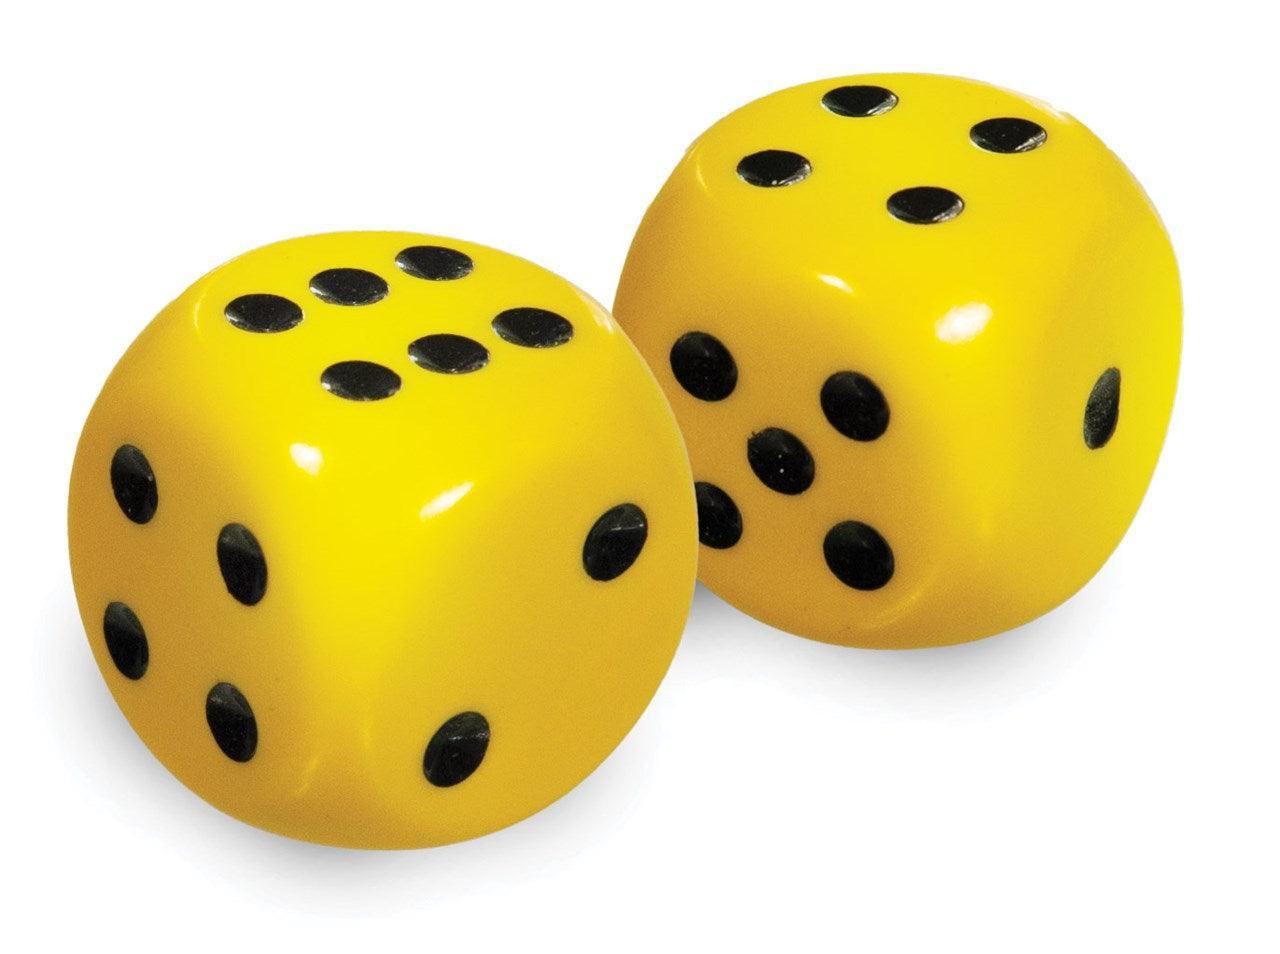 Low Vision Large Dice Set of 2 Dice Mutiple colors. - The Low Vision Store